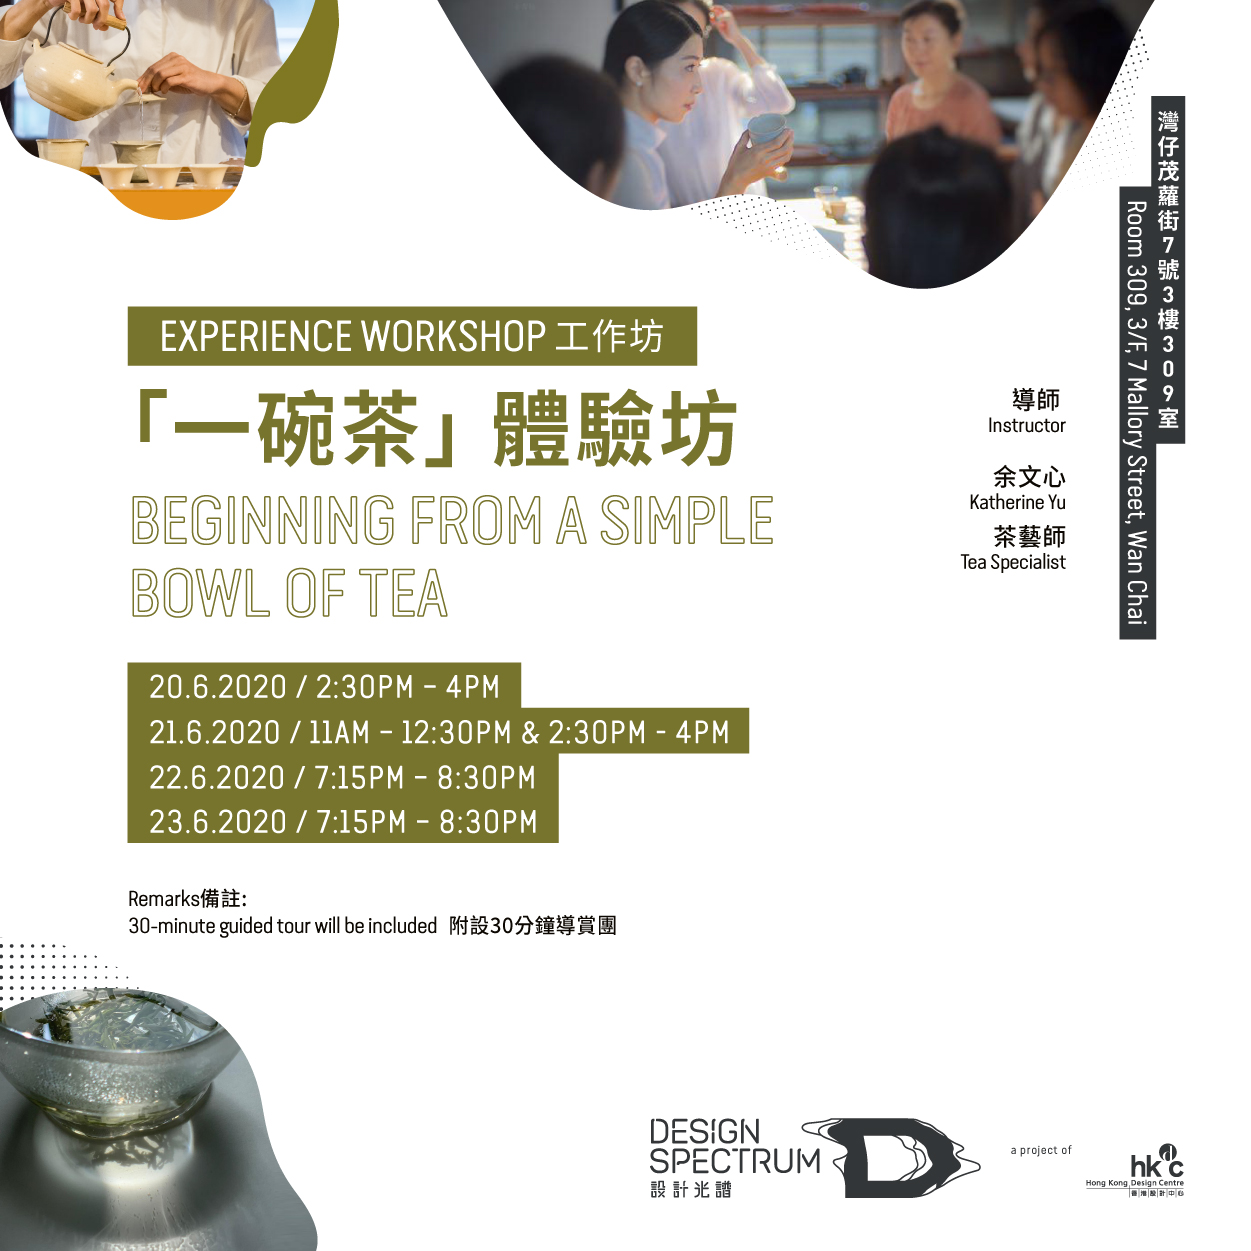 Design Spectrumbeginning-from-a-simple-bowl-of-tea-experience-workshop